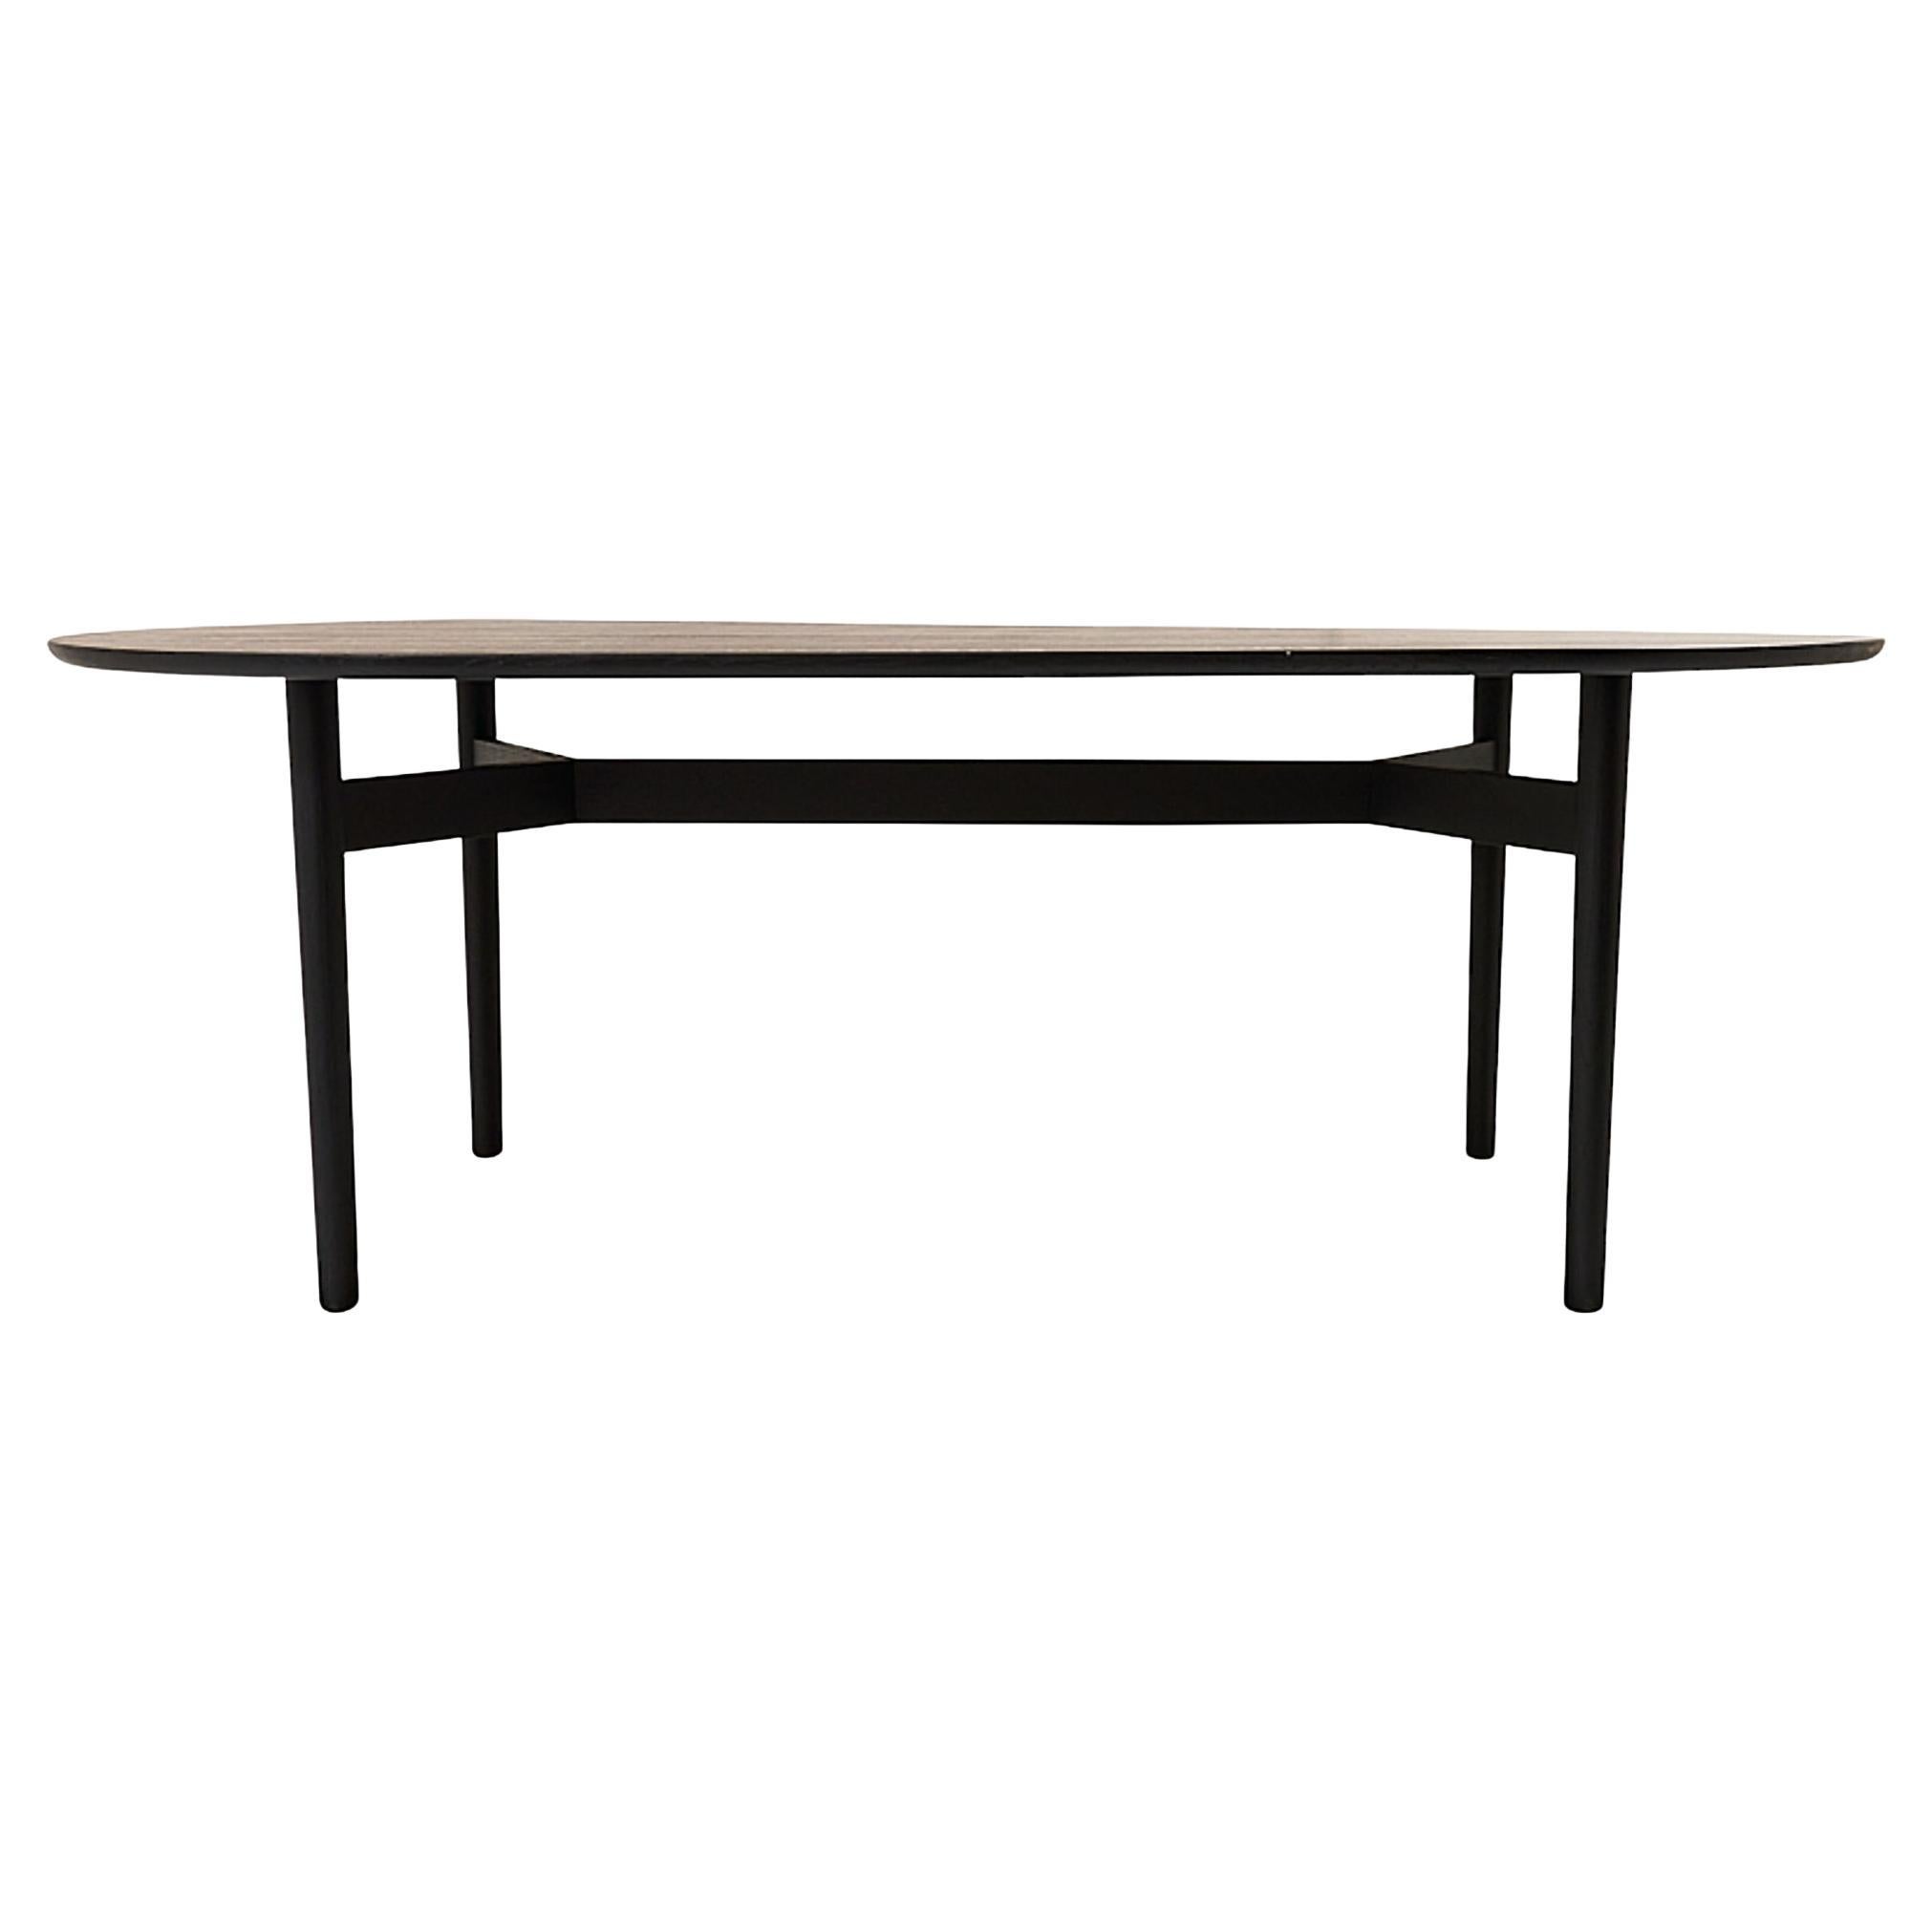 Schumacher Editions Puffin 98" Dining Table in Soft Black For Sale